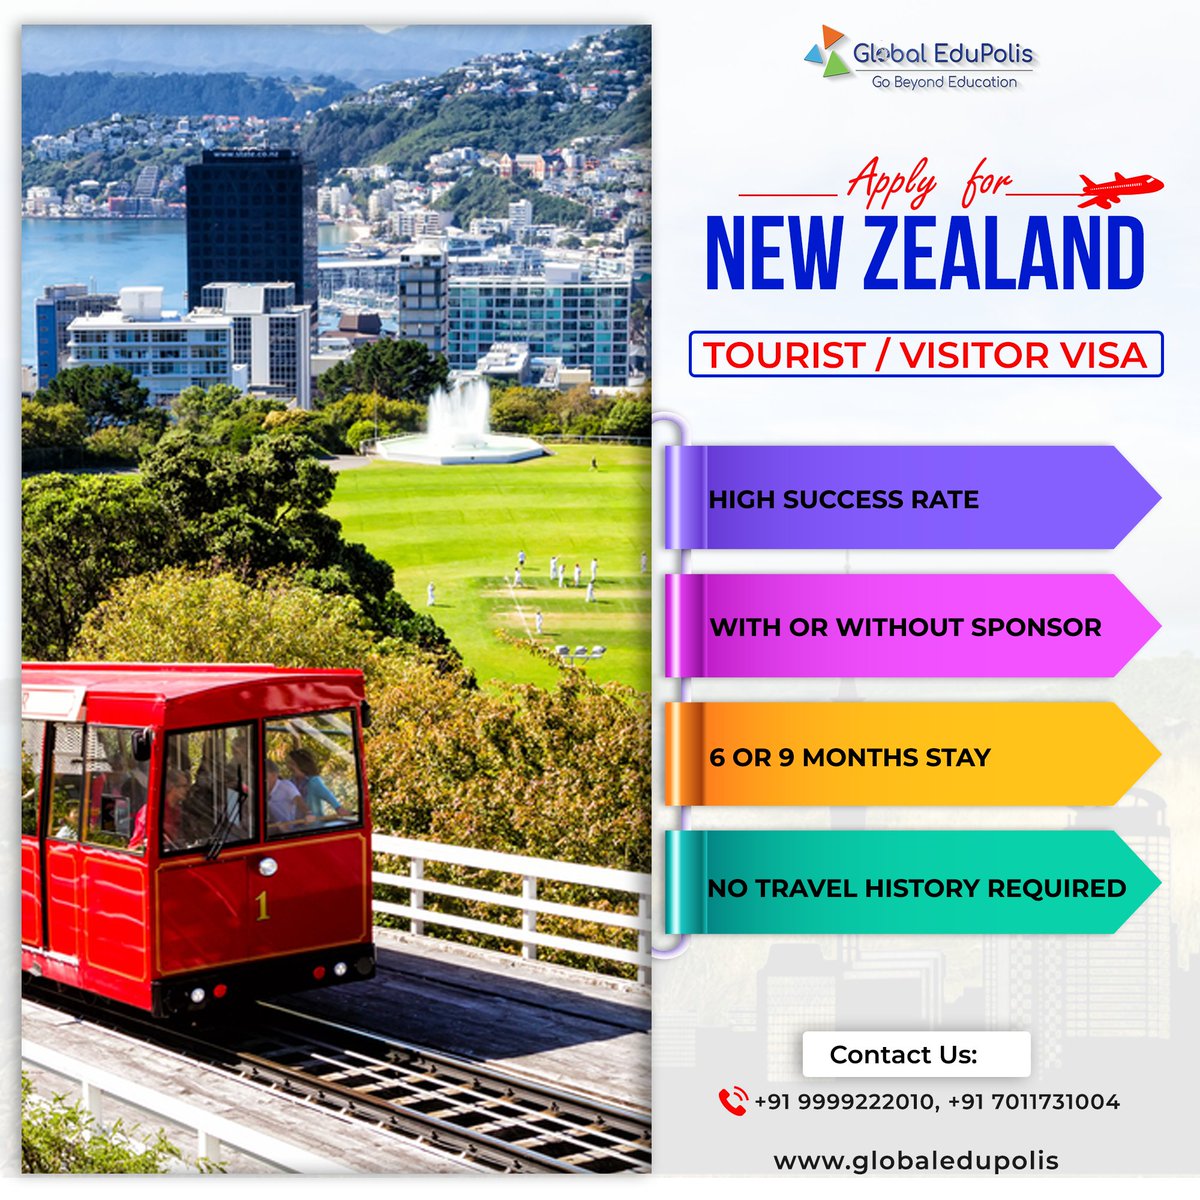 🚨Global EduPolis offers Hassle-free tourist or visitor visa application!
No sponsor needed, up to 9 months stay.
Apply now and get a high success rate with no travel history required!
.
.
.
#touristvisa #touristvisanewzealand #visa #visitvisa